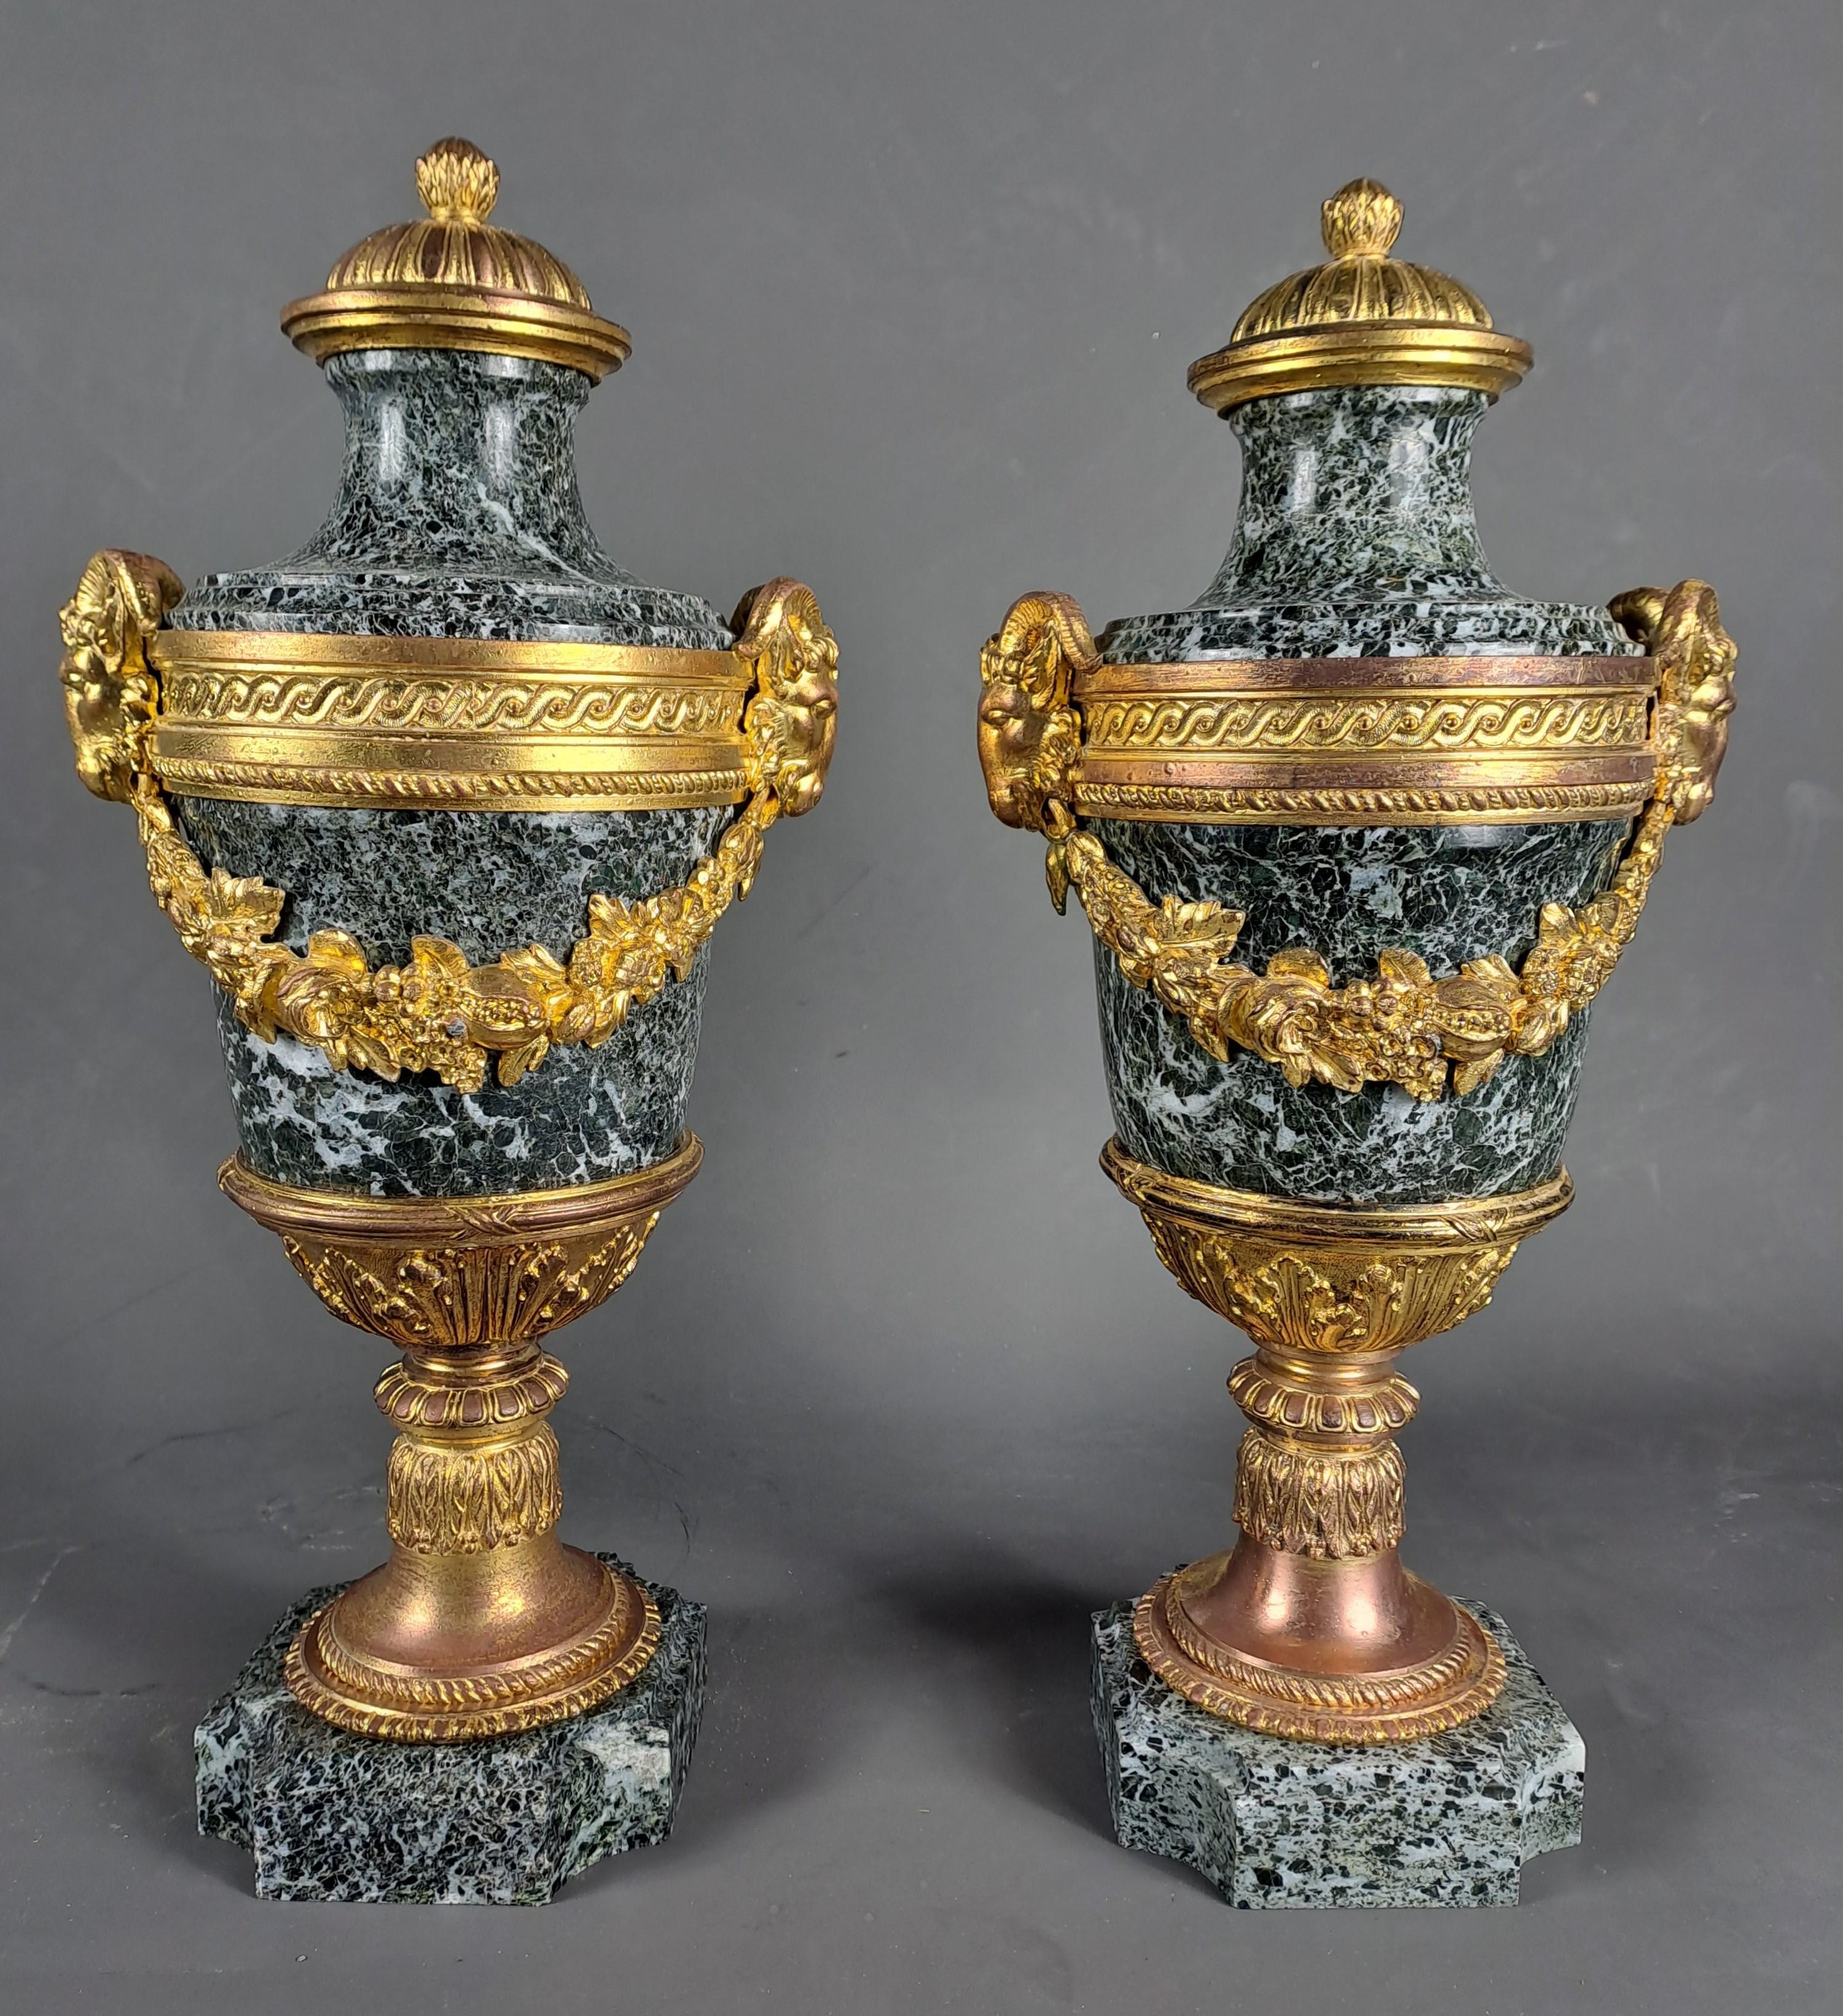 French Pair Of Louis XVI Style Cassolettes In Sea Green Marble And Gilt Bronze